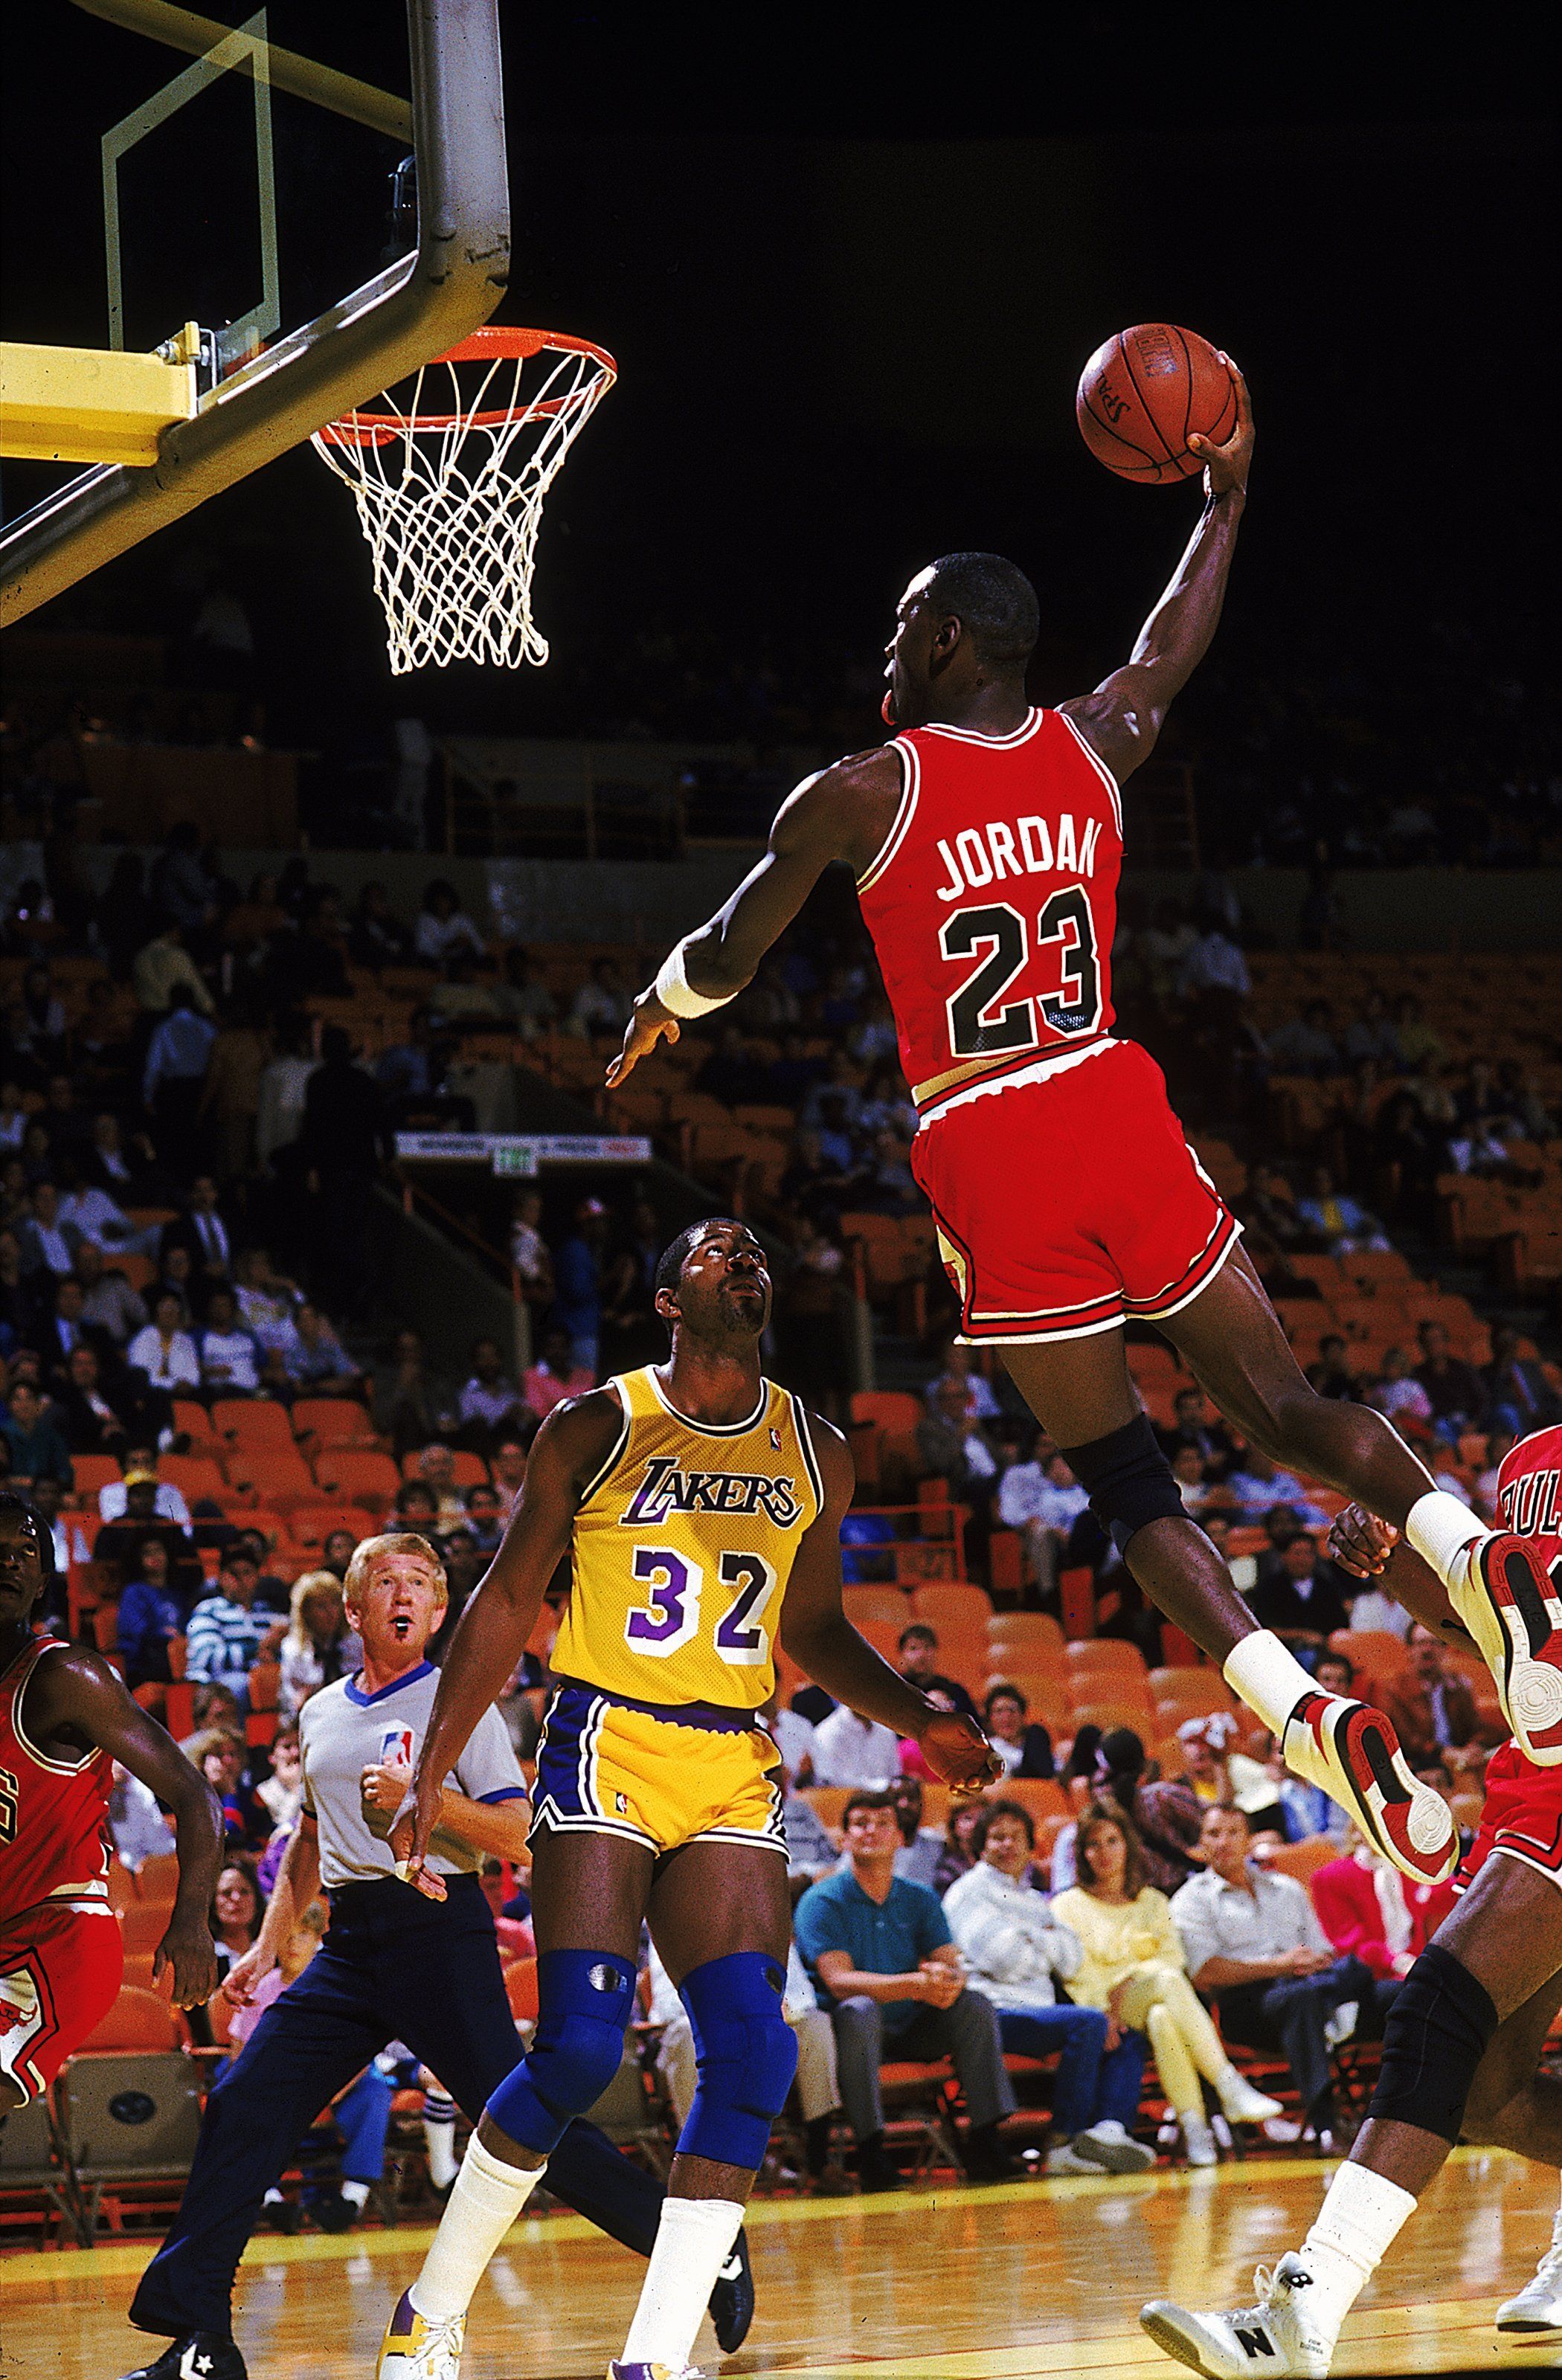 Michael Jordan Iphone 6 Wallpapers posted by Samantha Tremblay